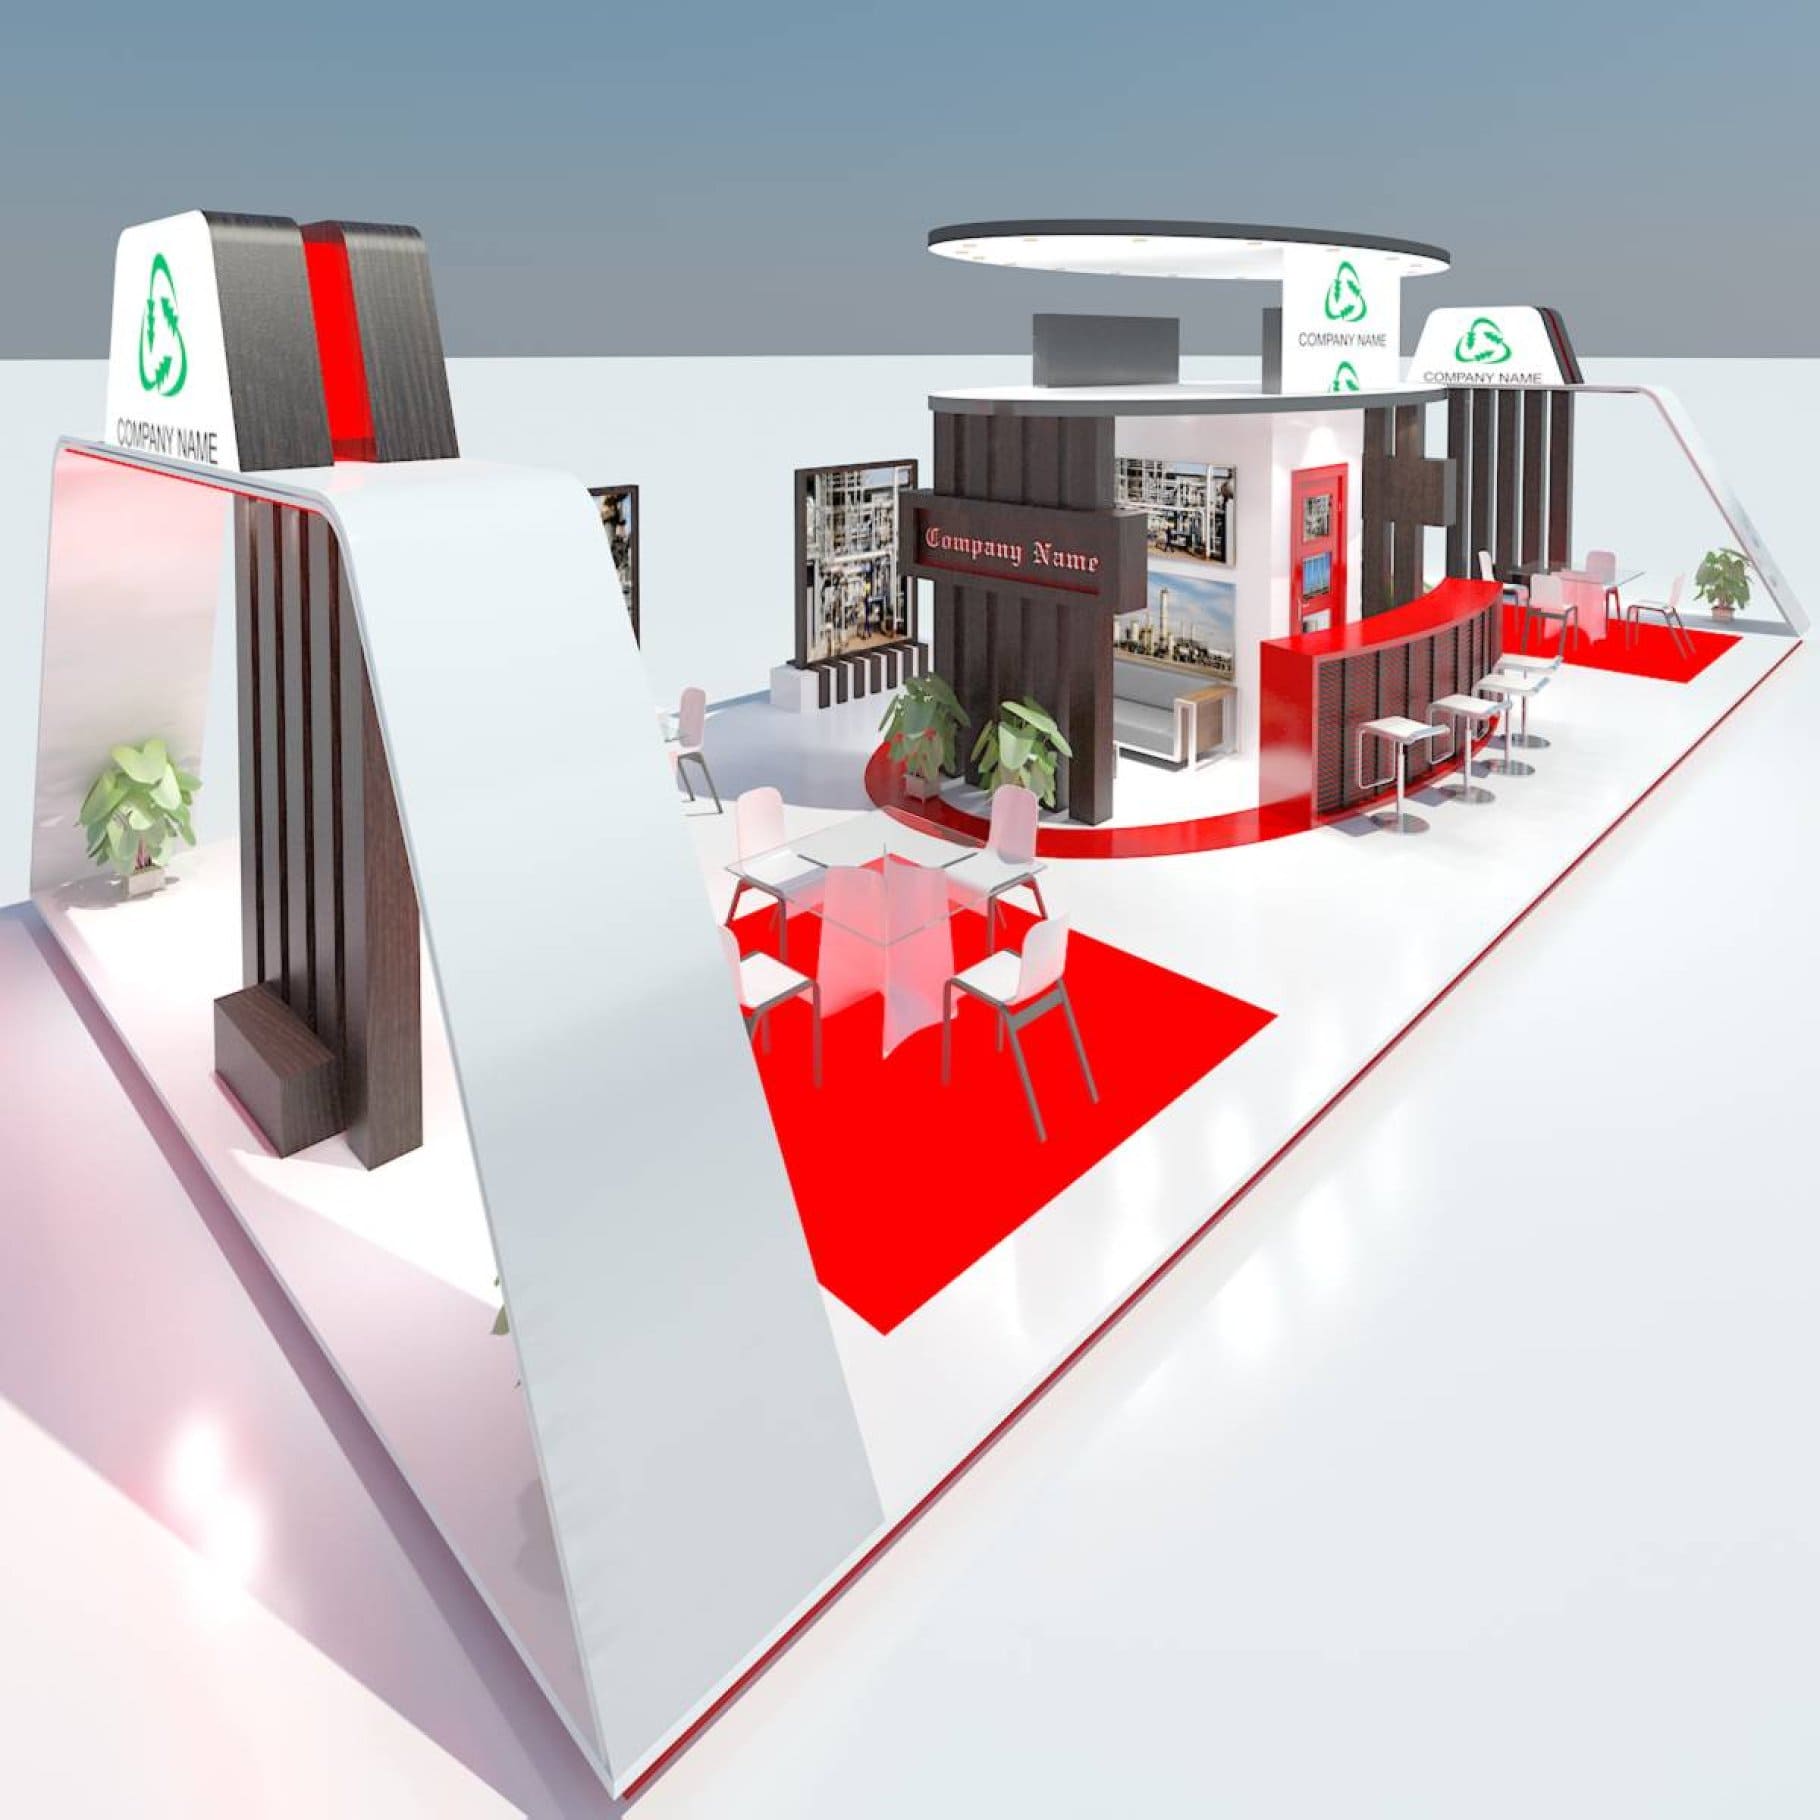 Top view of Exhibition Stands Collection 4.